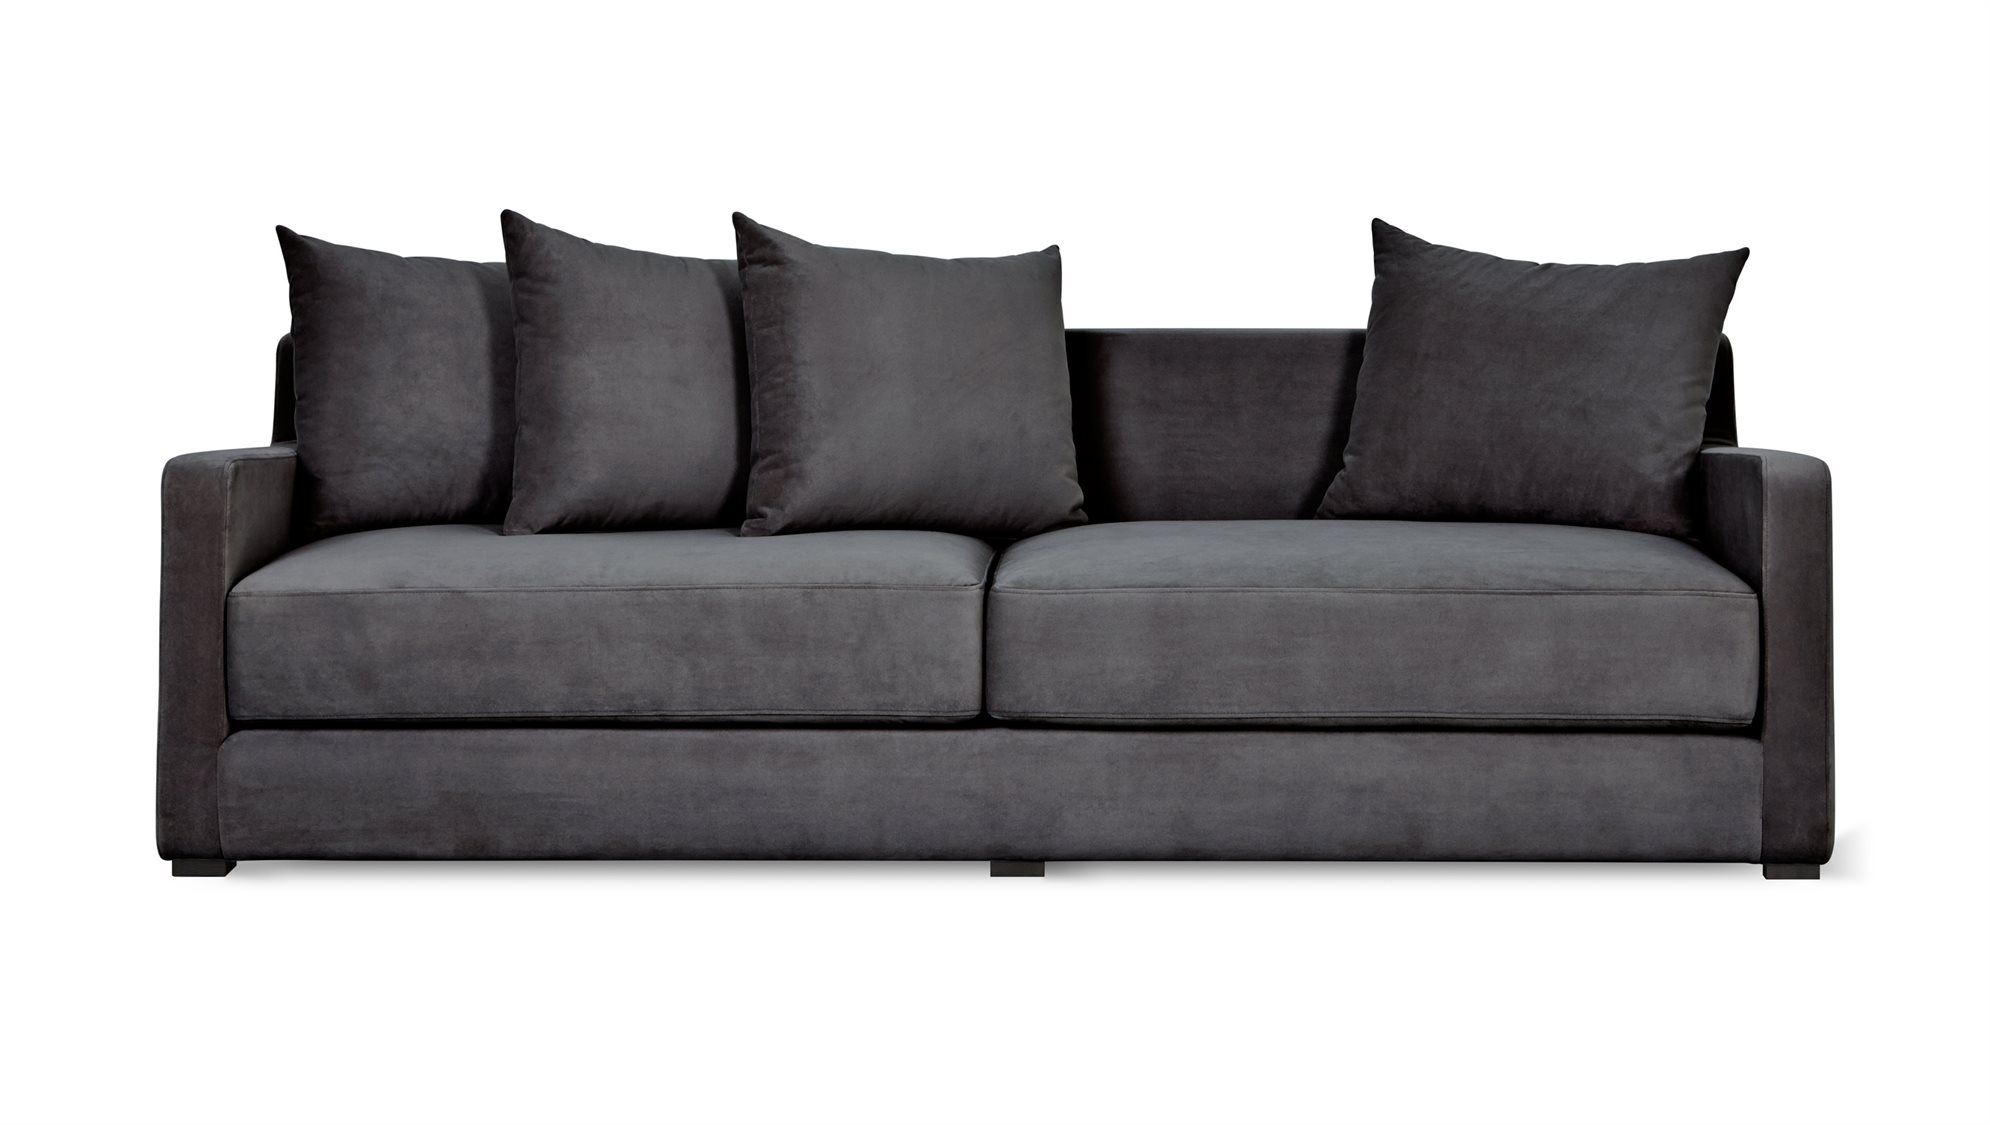 gus modern atwood sofa bed